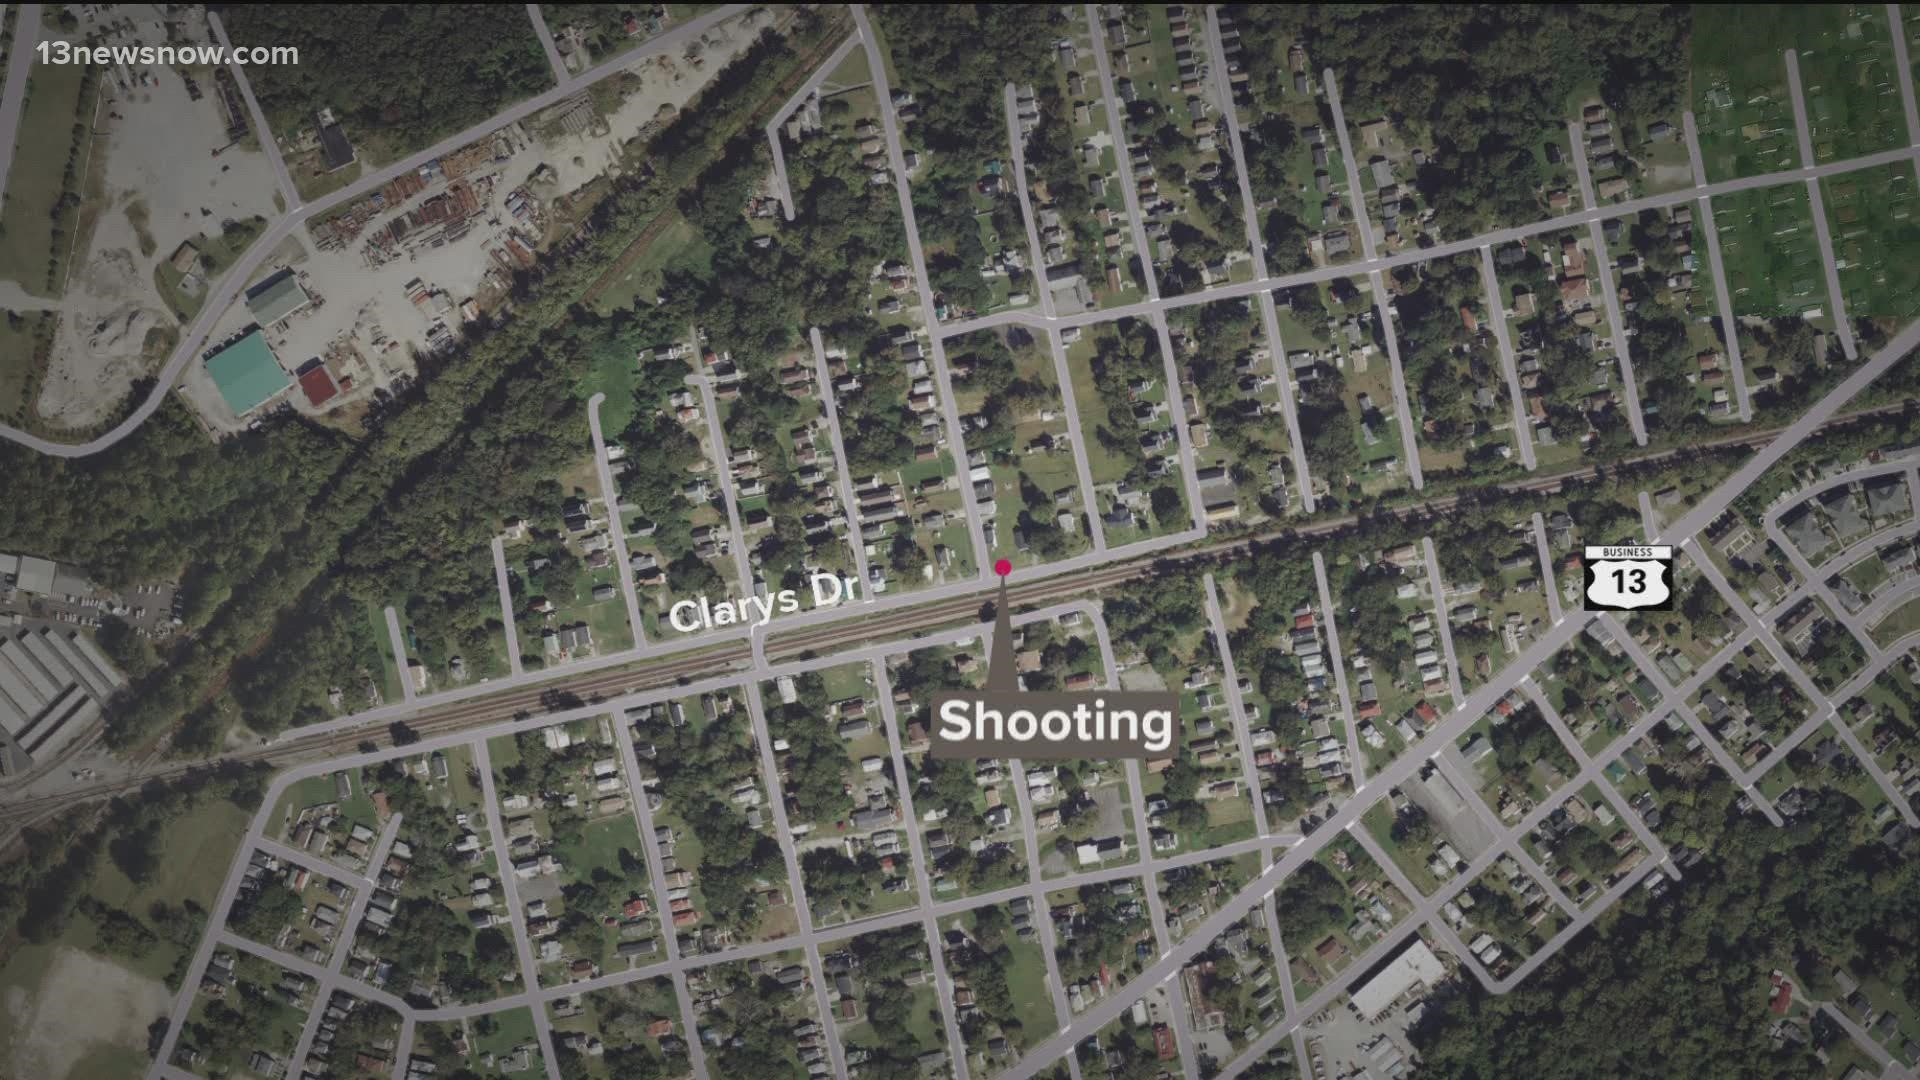 The shooting happened in the 1300 block of Clary’s Drive.